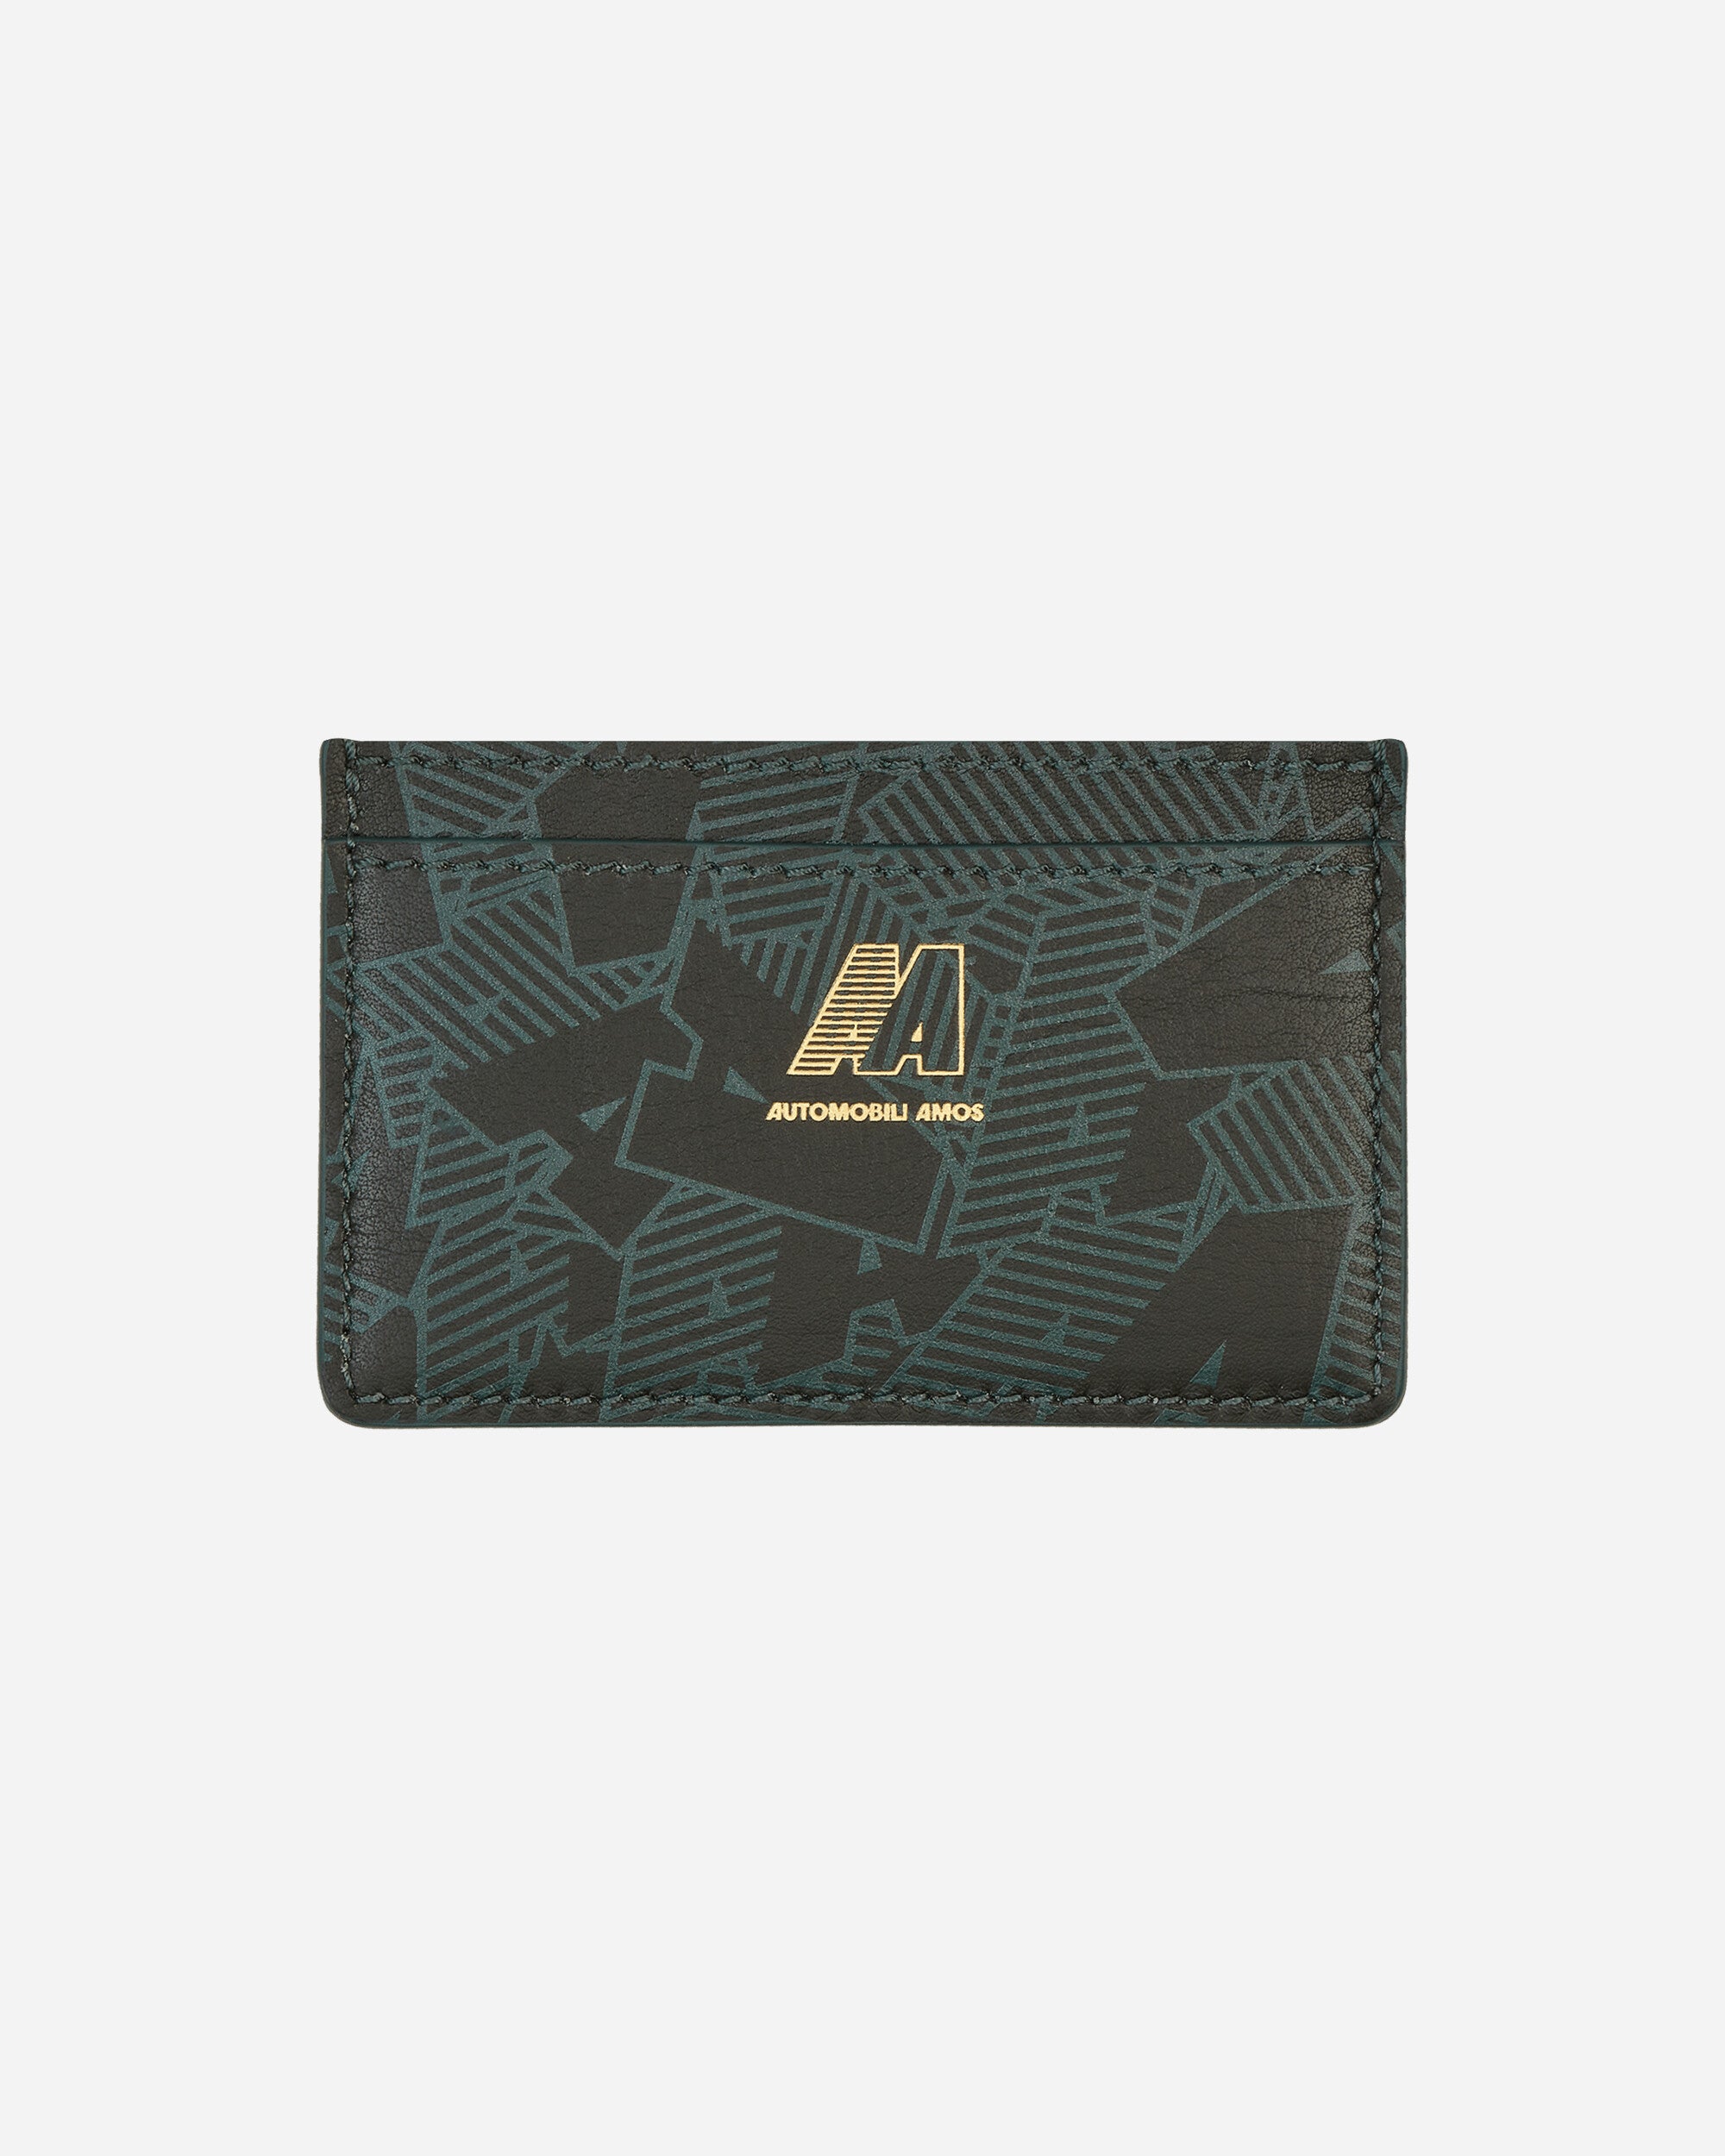 Automobili Amos Amos Wallet Green Wallets and Cardholders Wallets C1AAWL01  GREEN